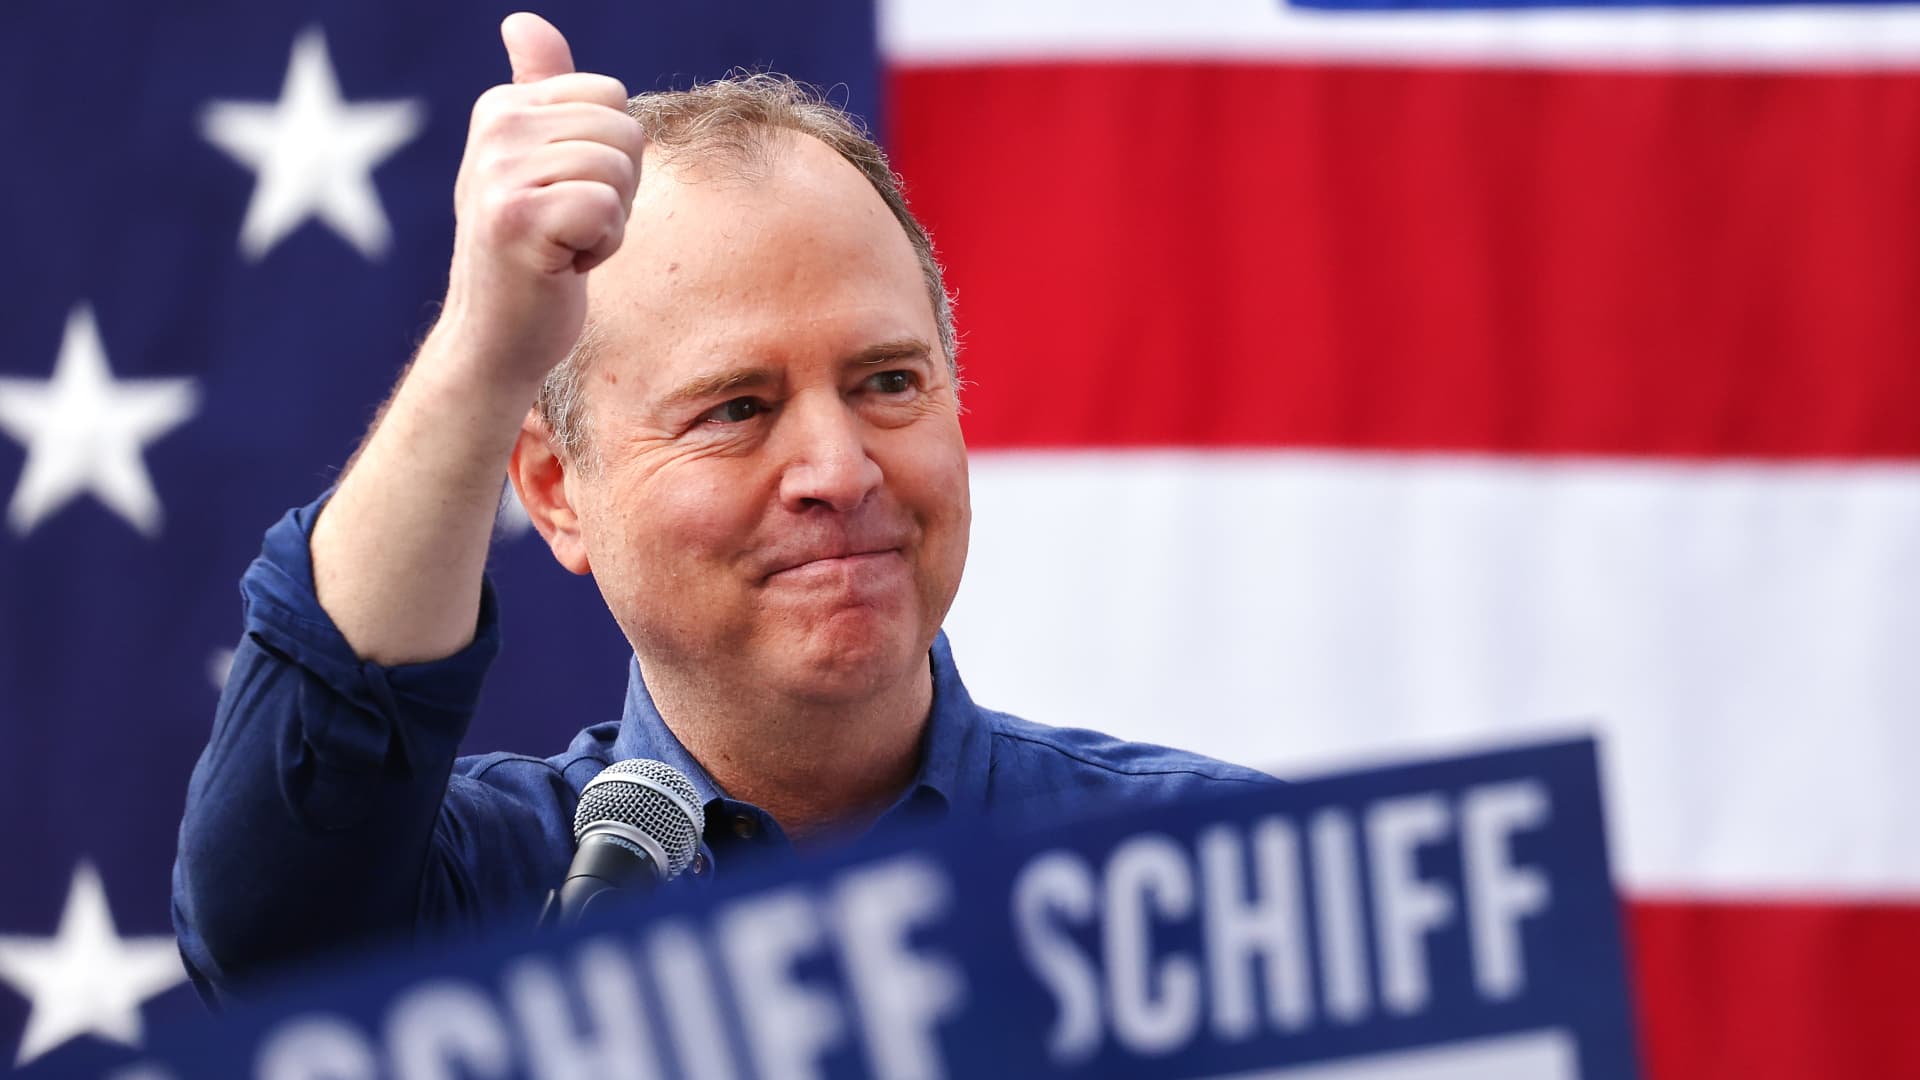 U.S. Rep. Adam Schiff (D-CA) gestures to supporters outside the International Alliance of Theatrical Stage Employees (IATSE) Union Hall, at the kickoff rally for his two-week ‘California for All Tour’, on February 11, 2023 in Burbank, California. 